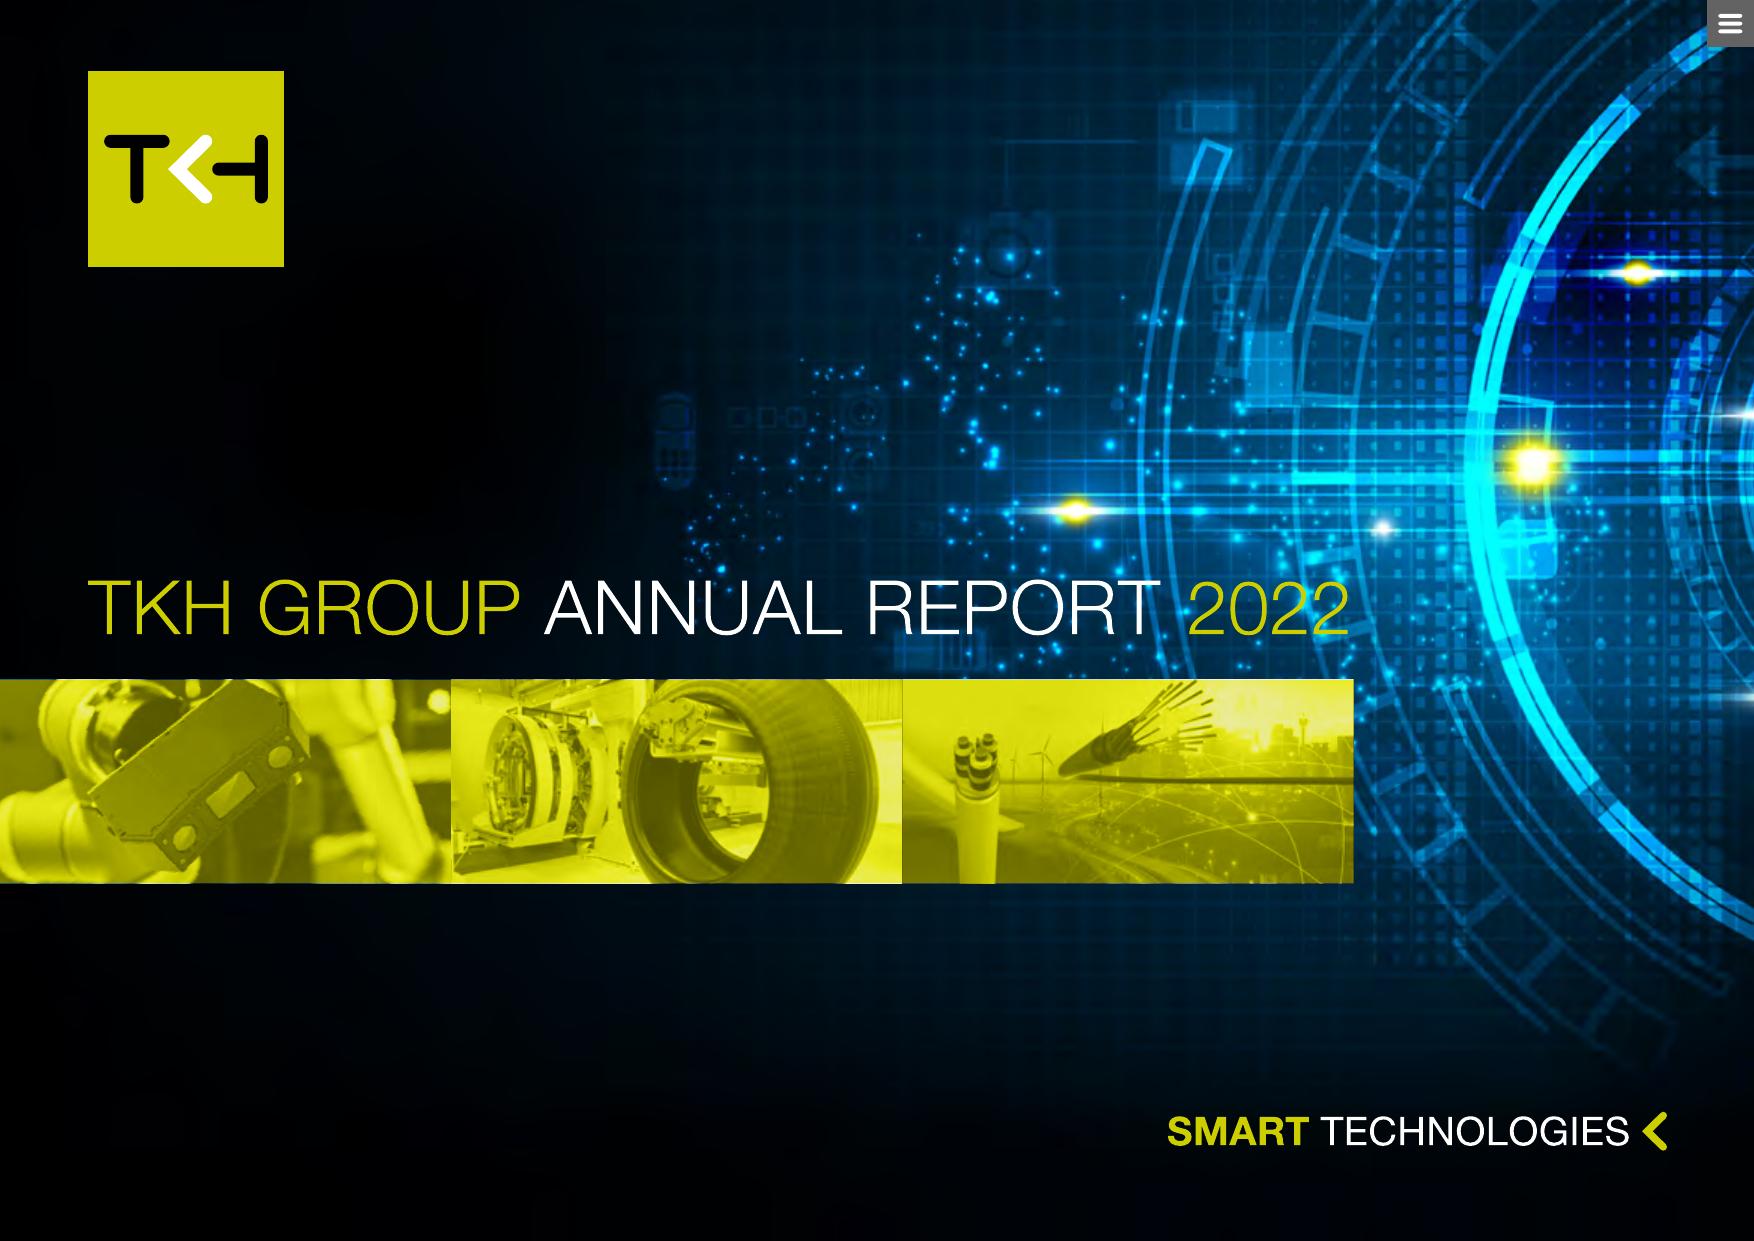 TKHGROUP 2022 Annual Report